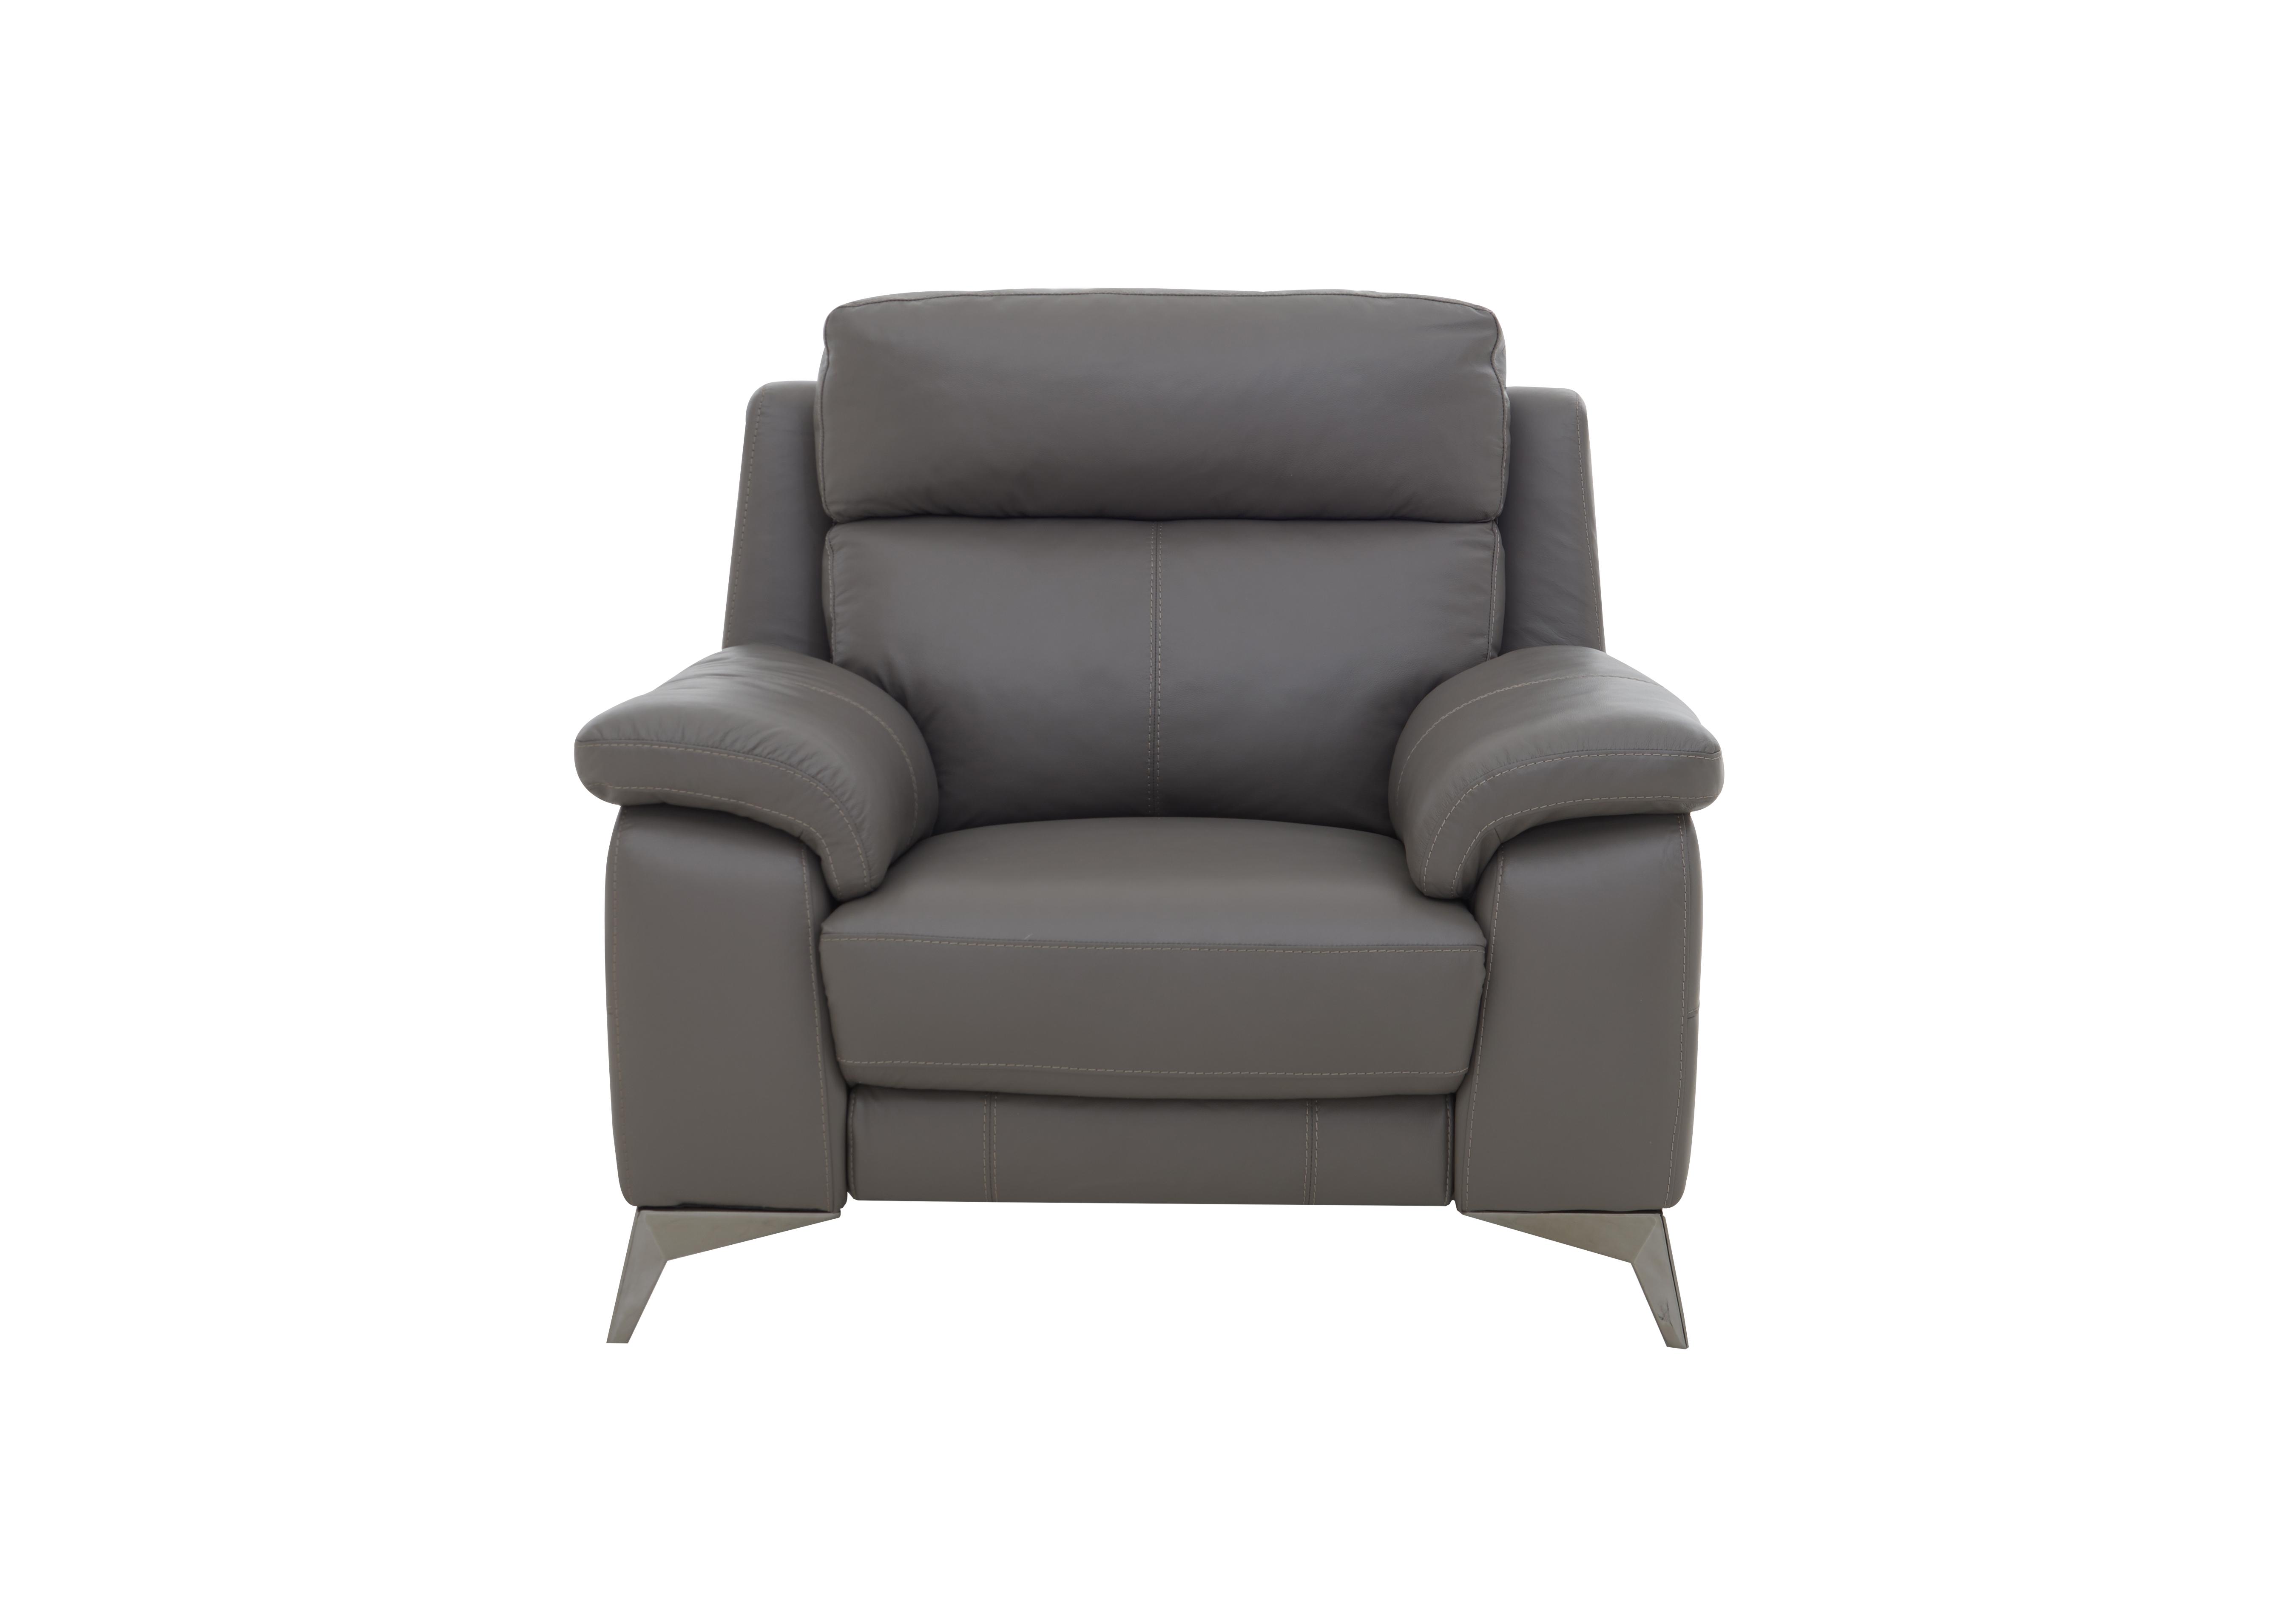 Missouri Leather Recliner Armchair with Power Headrest in Bv-042e Elephant on Furniture Village